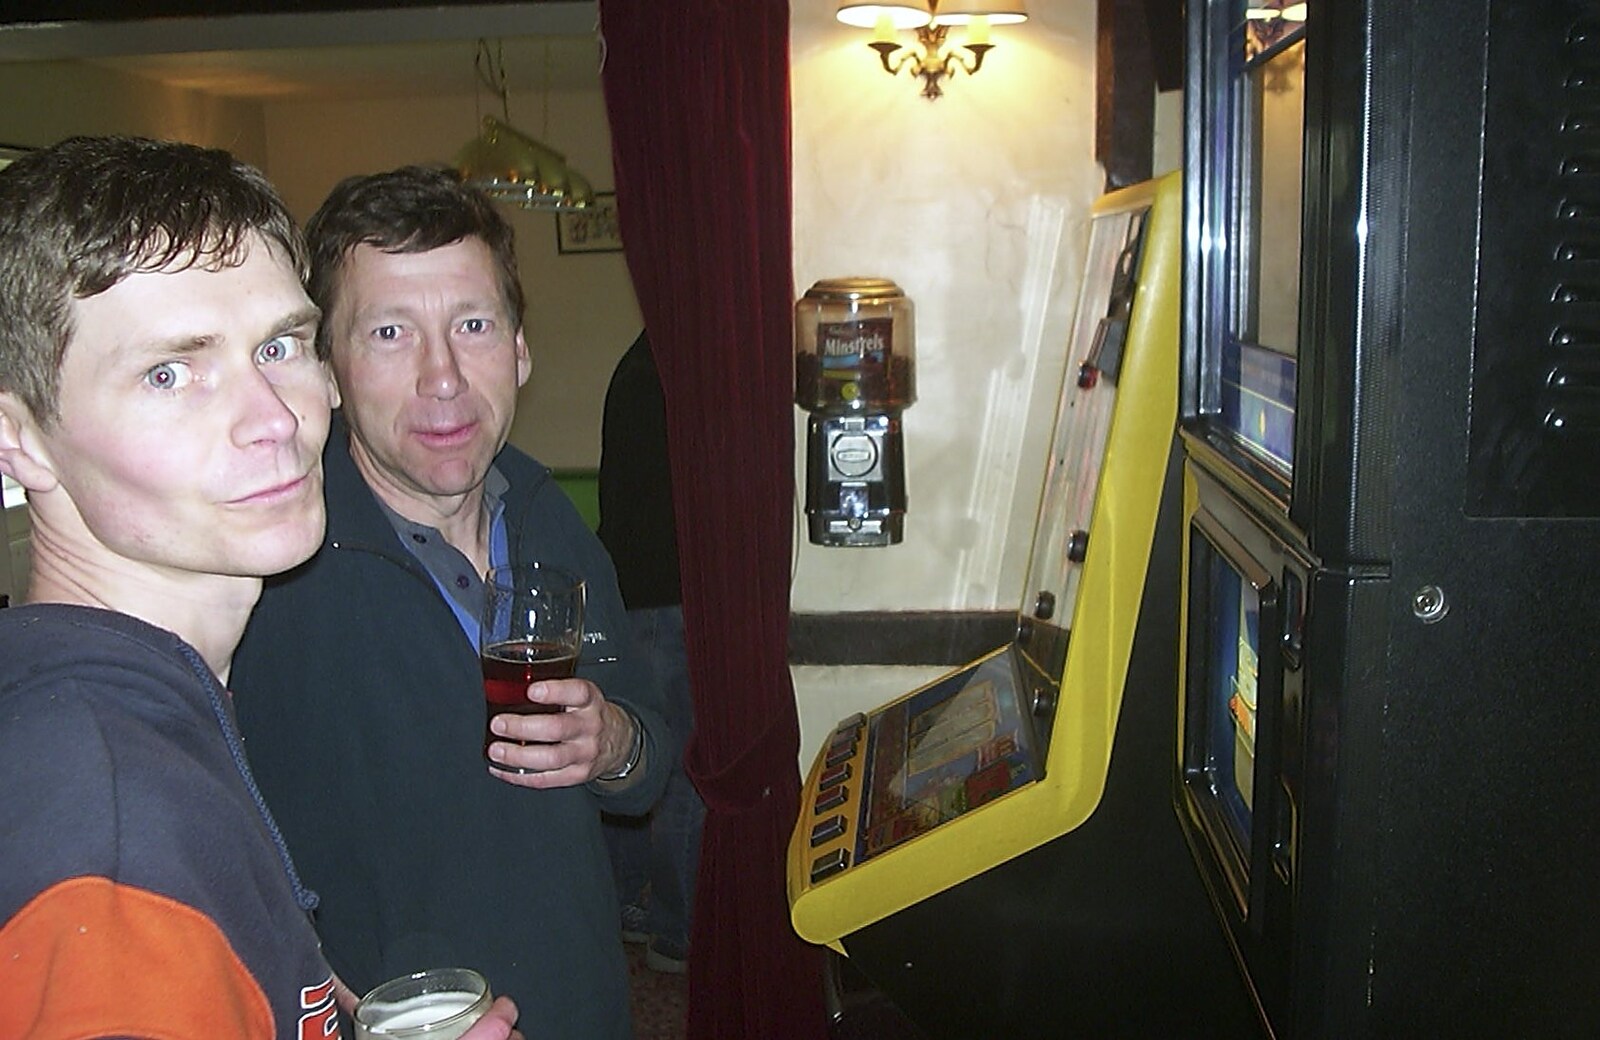 The BSCC Easter Bike Ride, Thelnetham and Redgrave, Suffolk - 10th April 2004: Apple and Ninja M on the jukebox